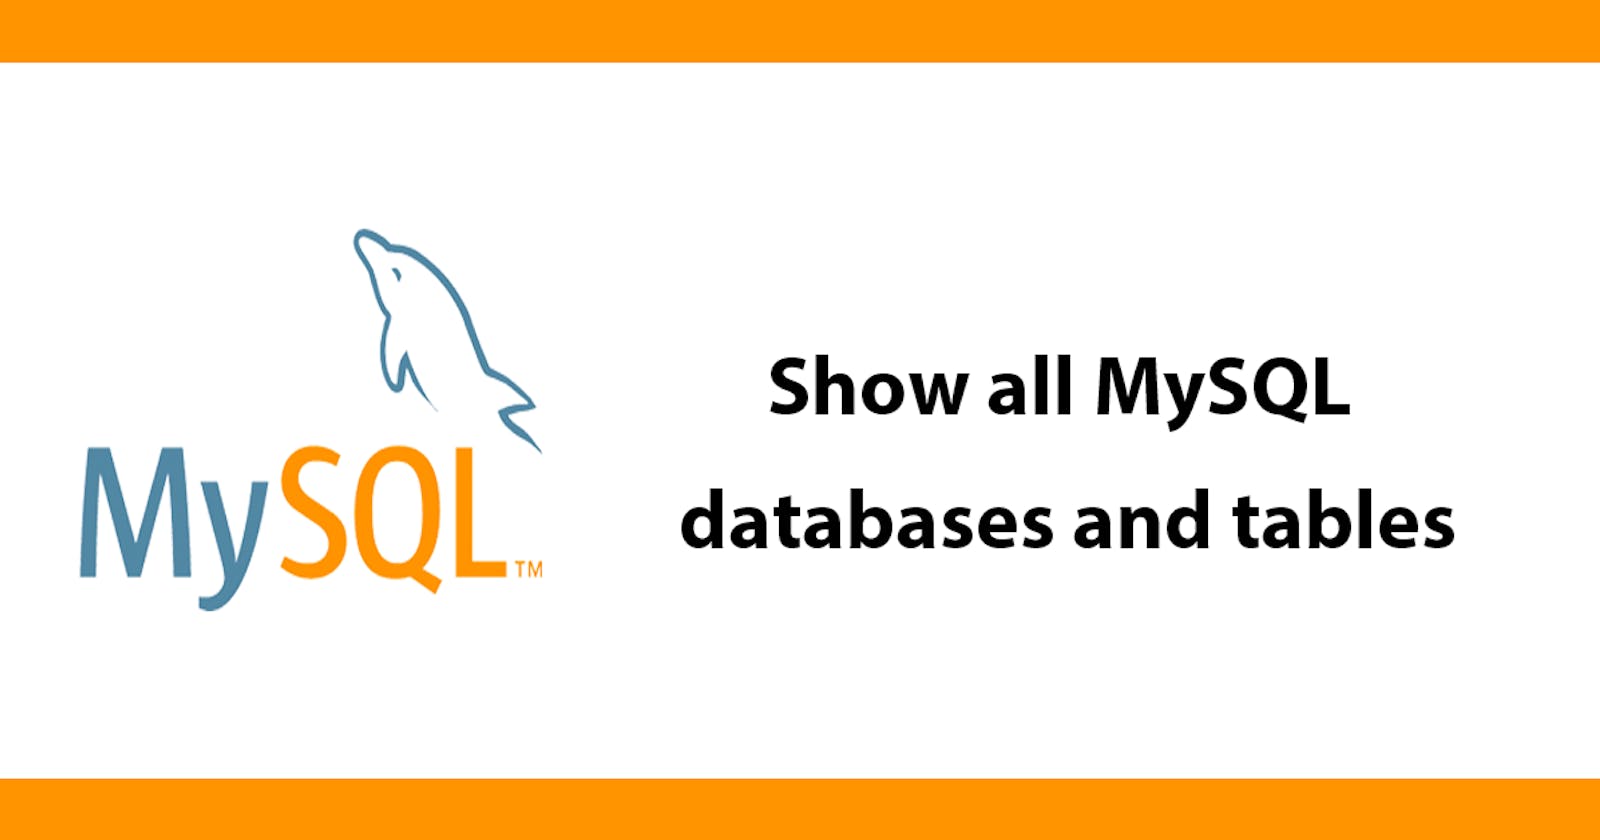 Show all MySQL databases and tables